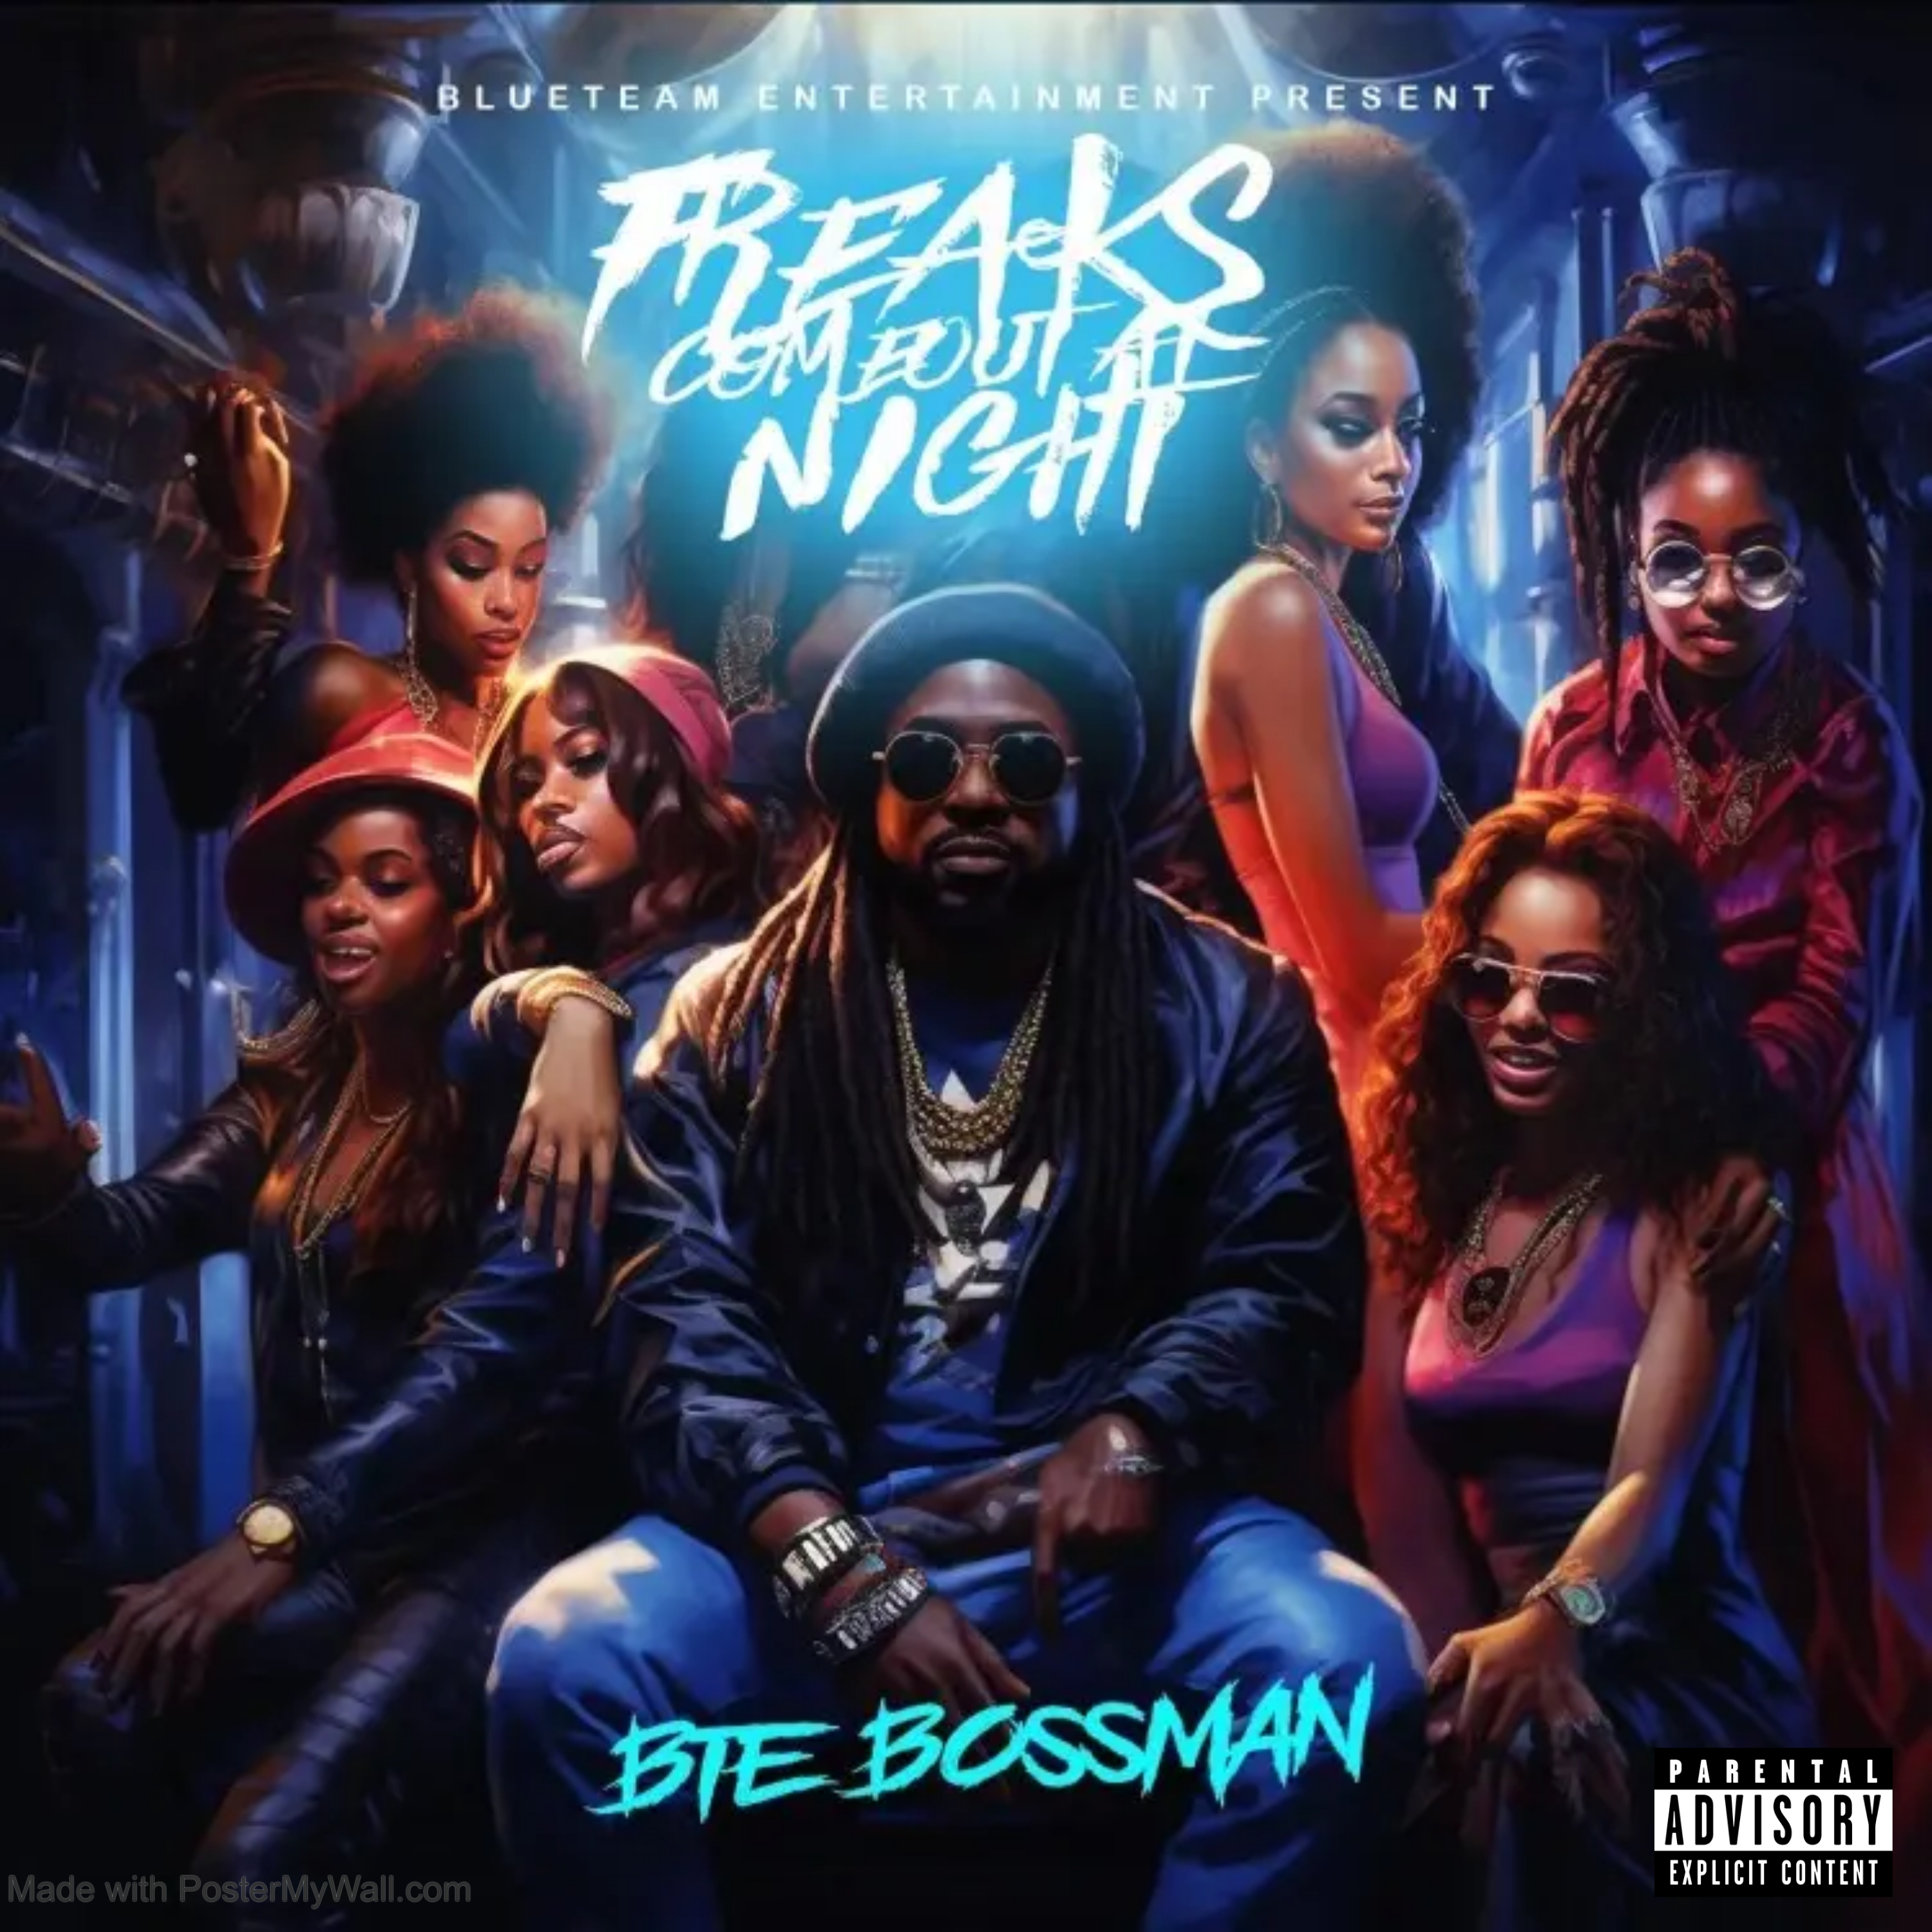 BTEBossMan - Freaks Come Out At Night Cover Art